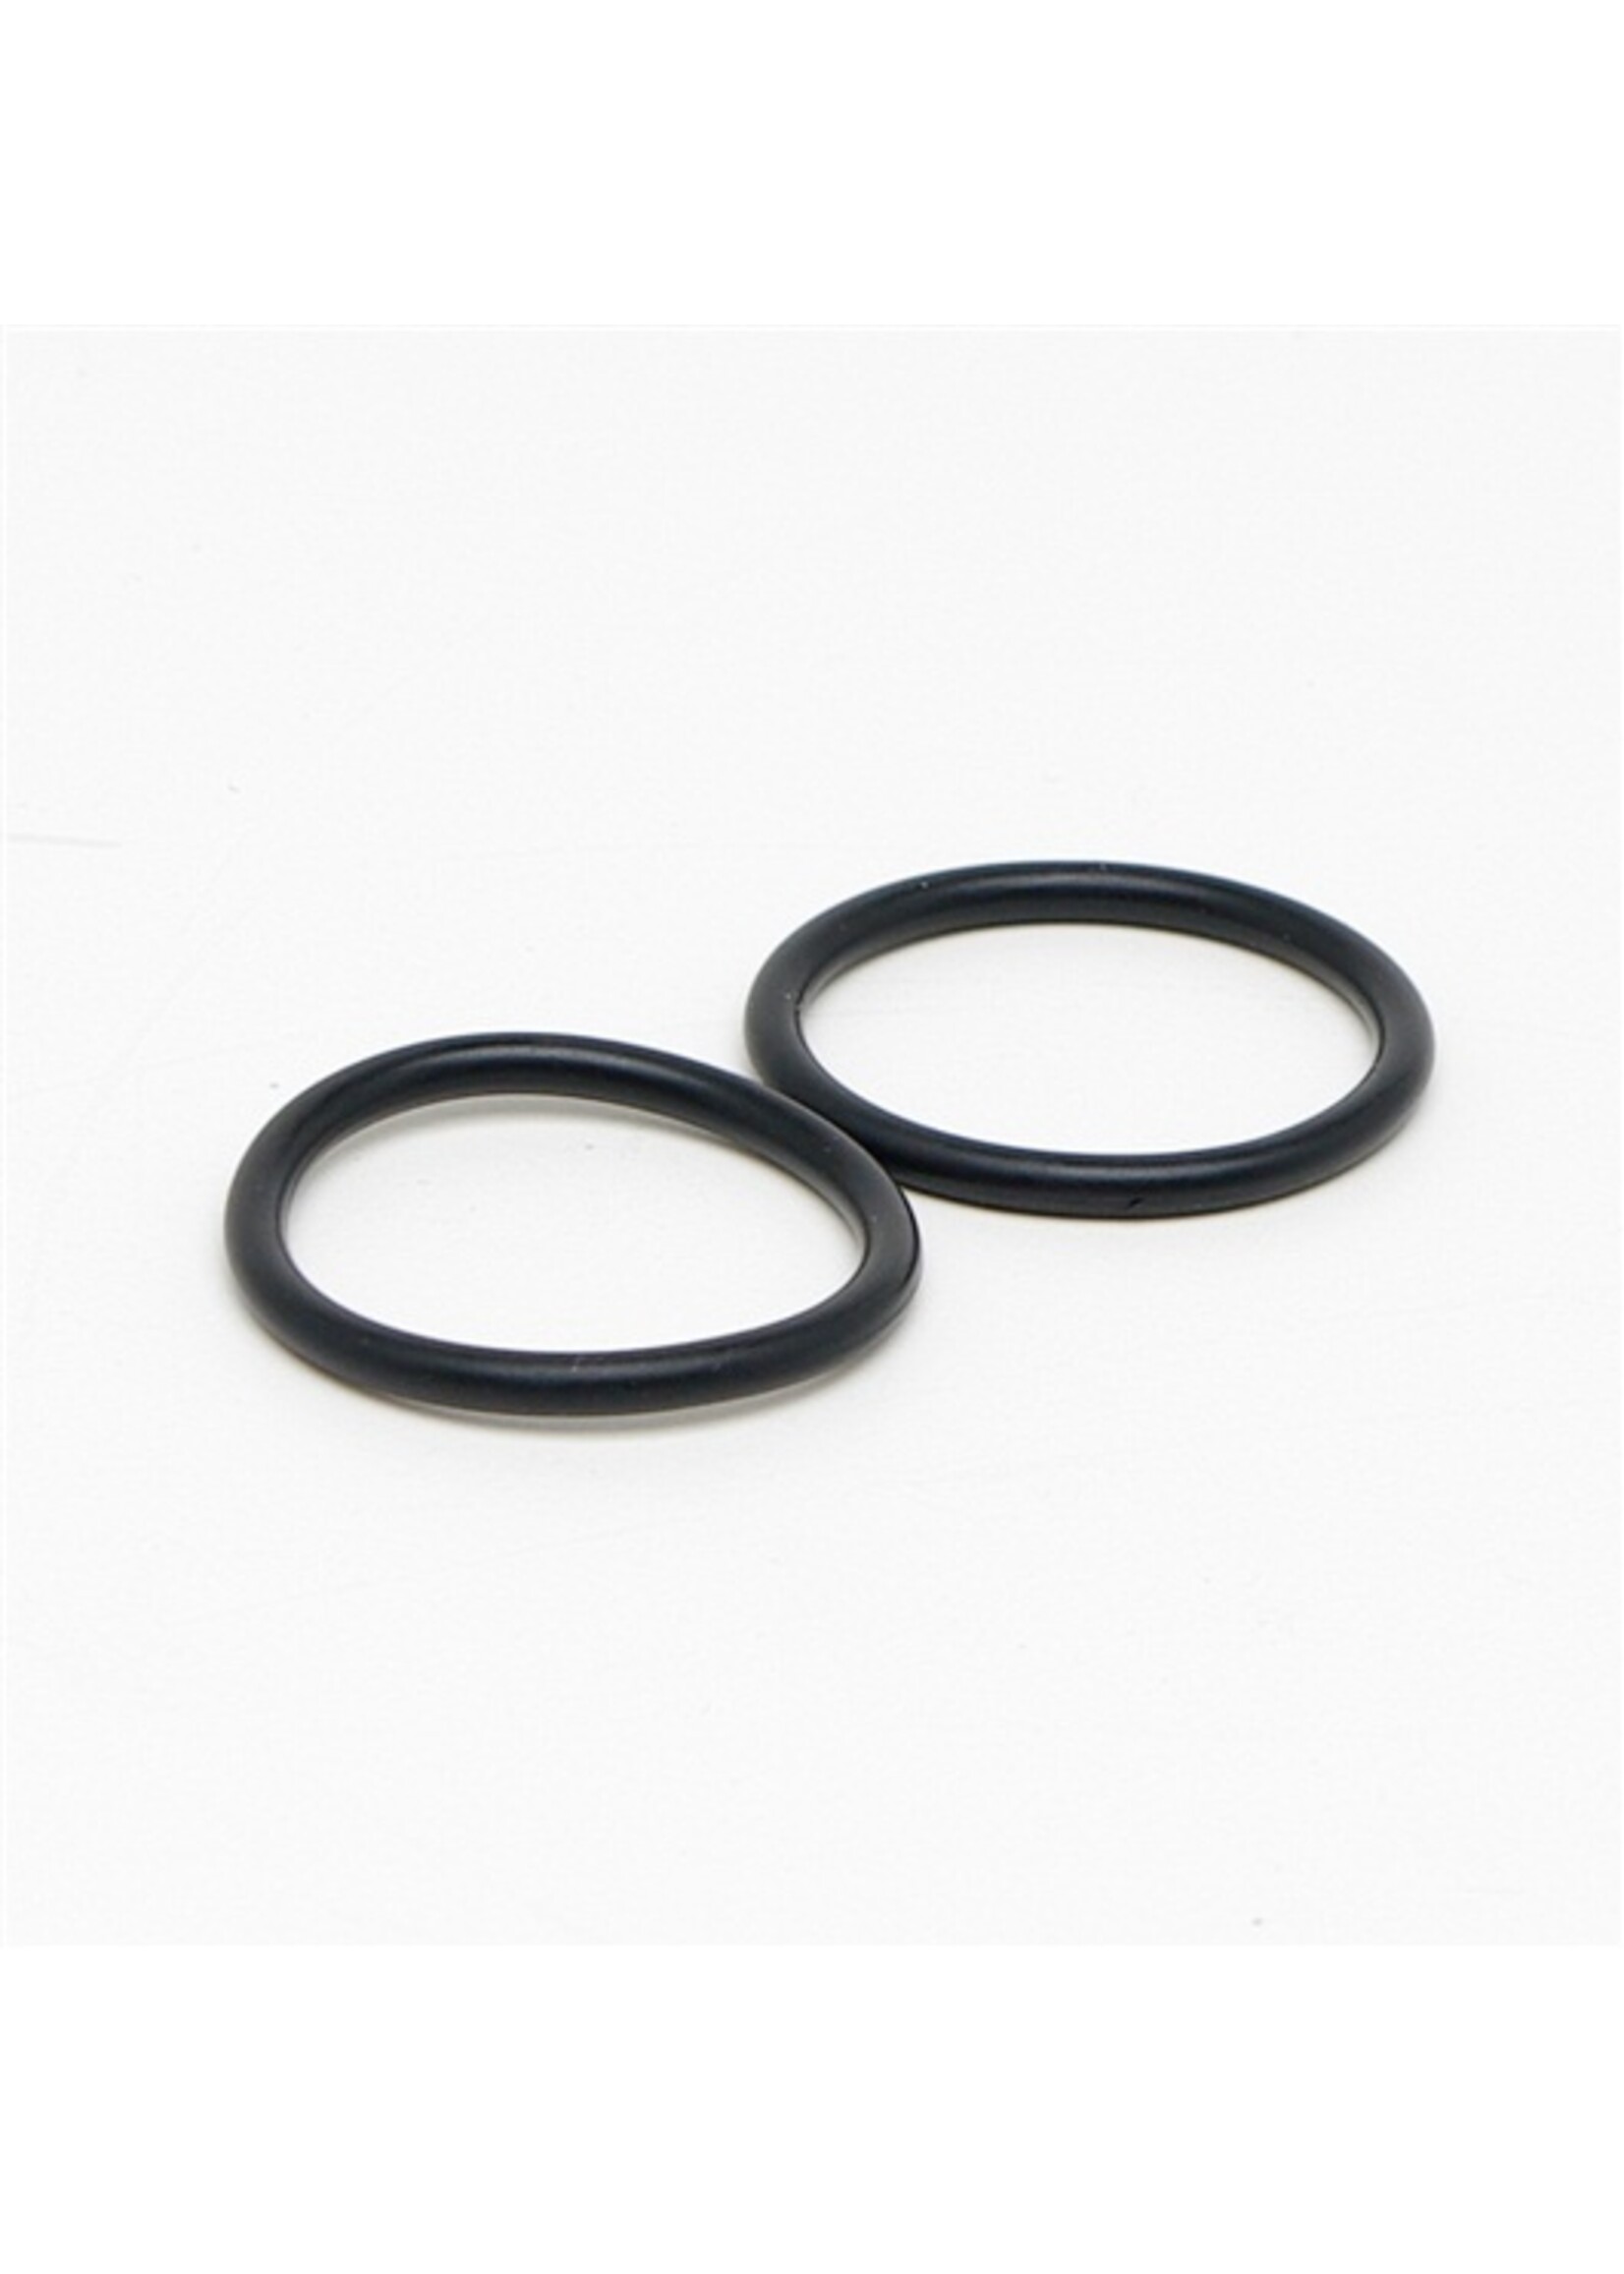 Fluval FX5/6 Top Cover Click-fit O -Ring (A20212)